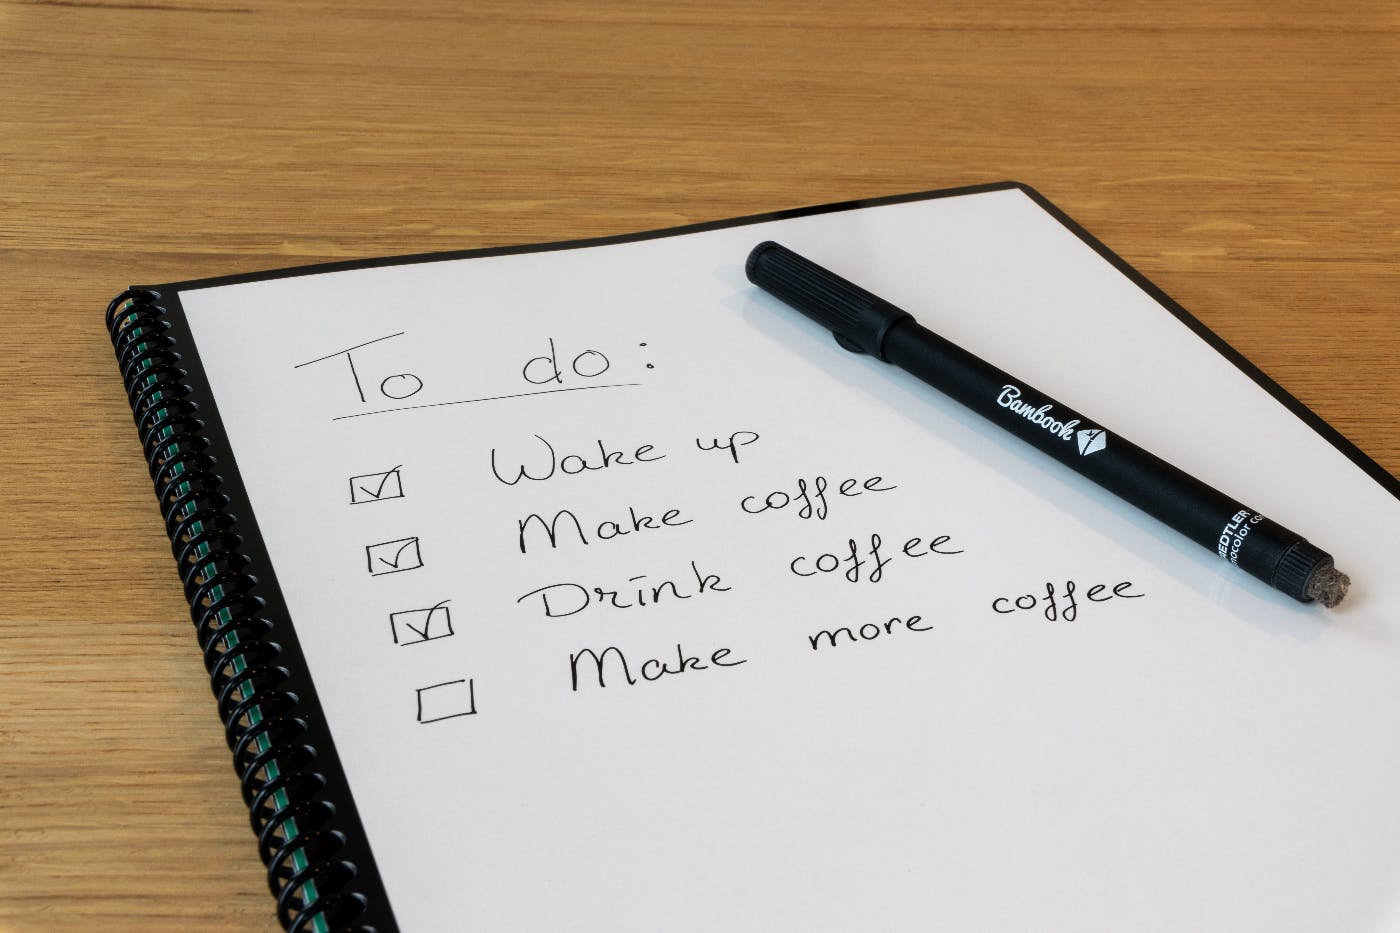 A checklist of things to do, Starting with wake up, make coffee, drink coffee, make more coffee.